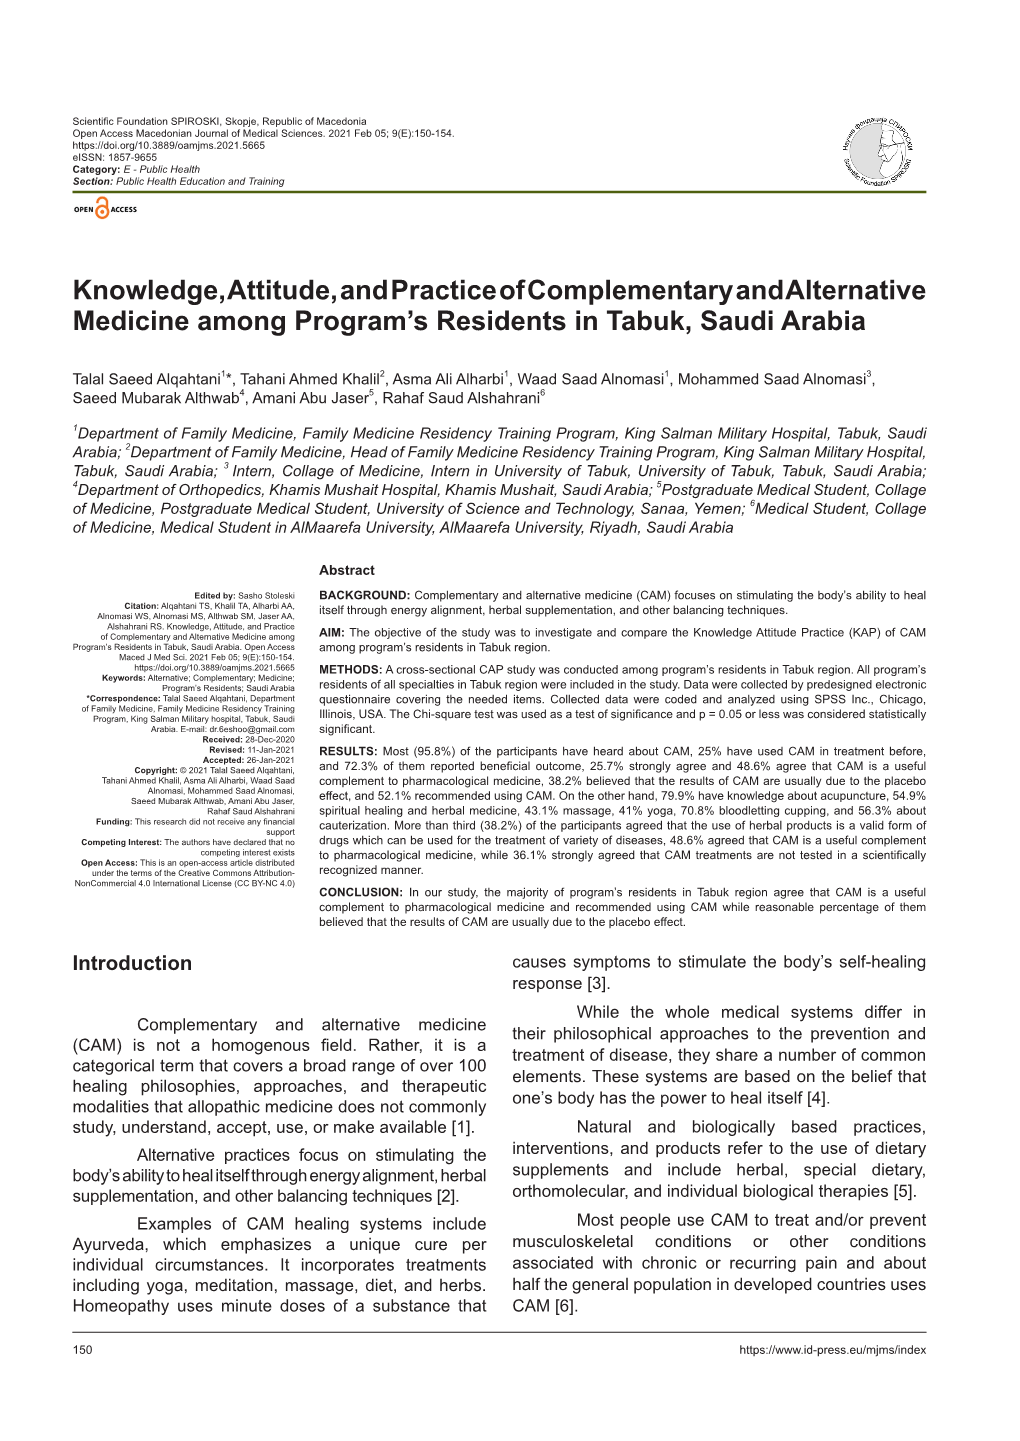 Knowledge, Attitude, and Practice of Complementary and Alternative Medicine Among Program’S Residents in Tabuk, Saudi Arabia